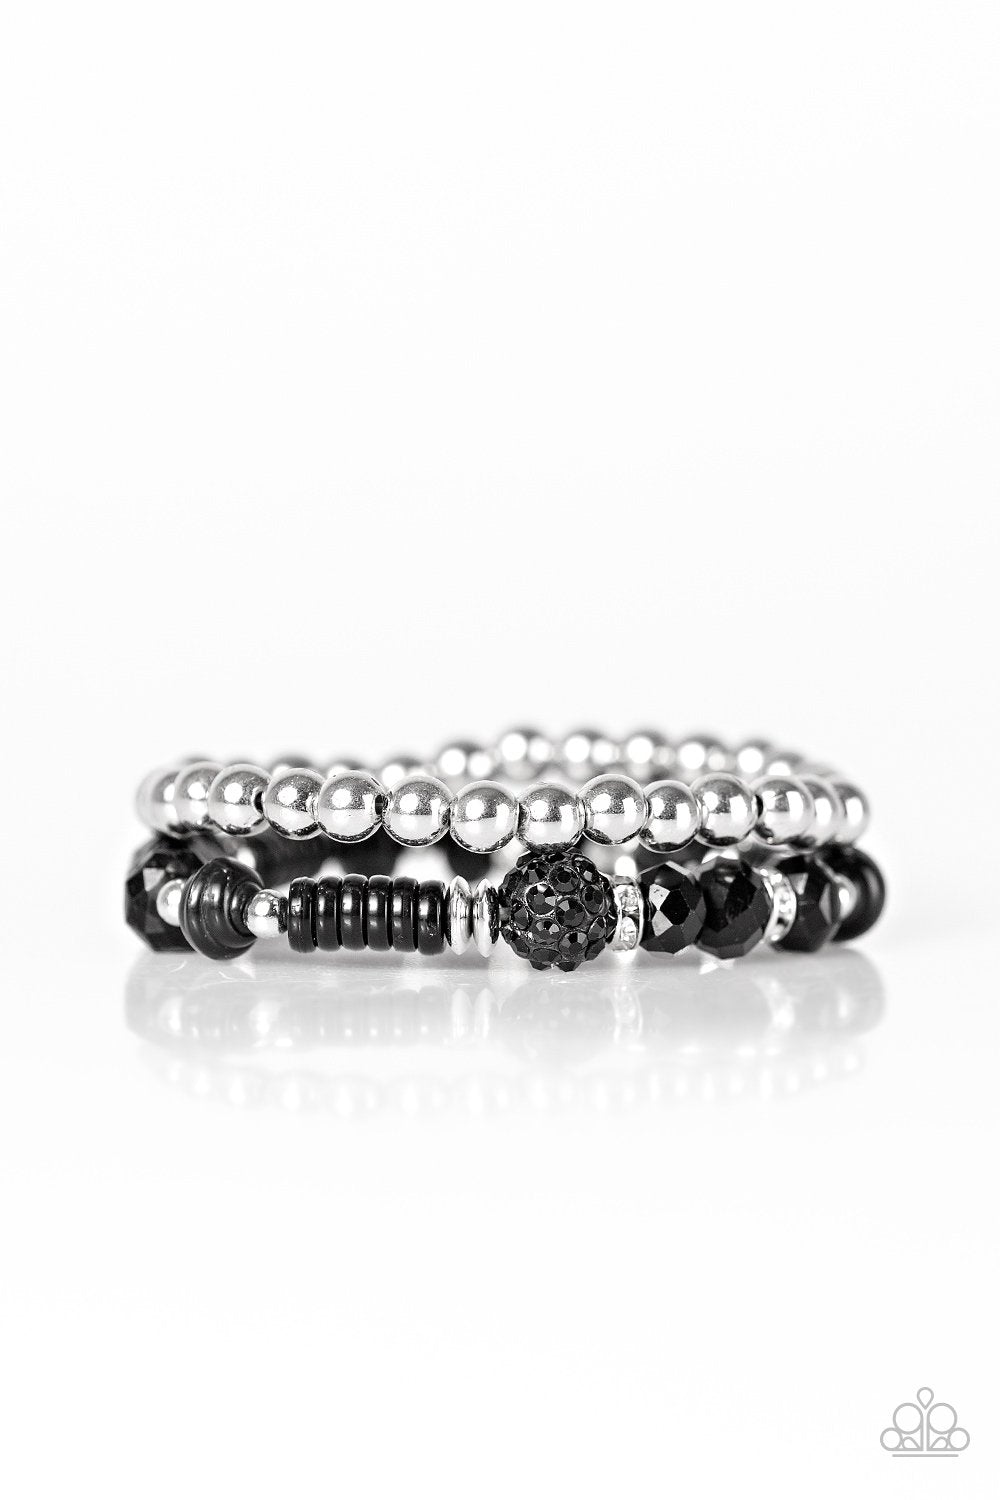 My Dance Card Is Full Black and Silver Bracelet Set - Paparazzi Accessories-CarasShop.com - $5 Jewelry by Cara Jewels